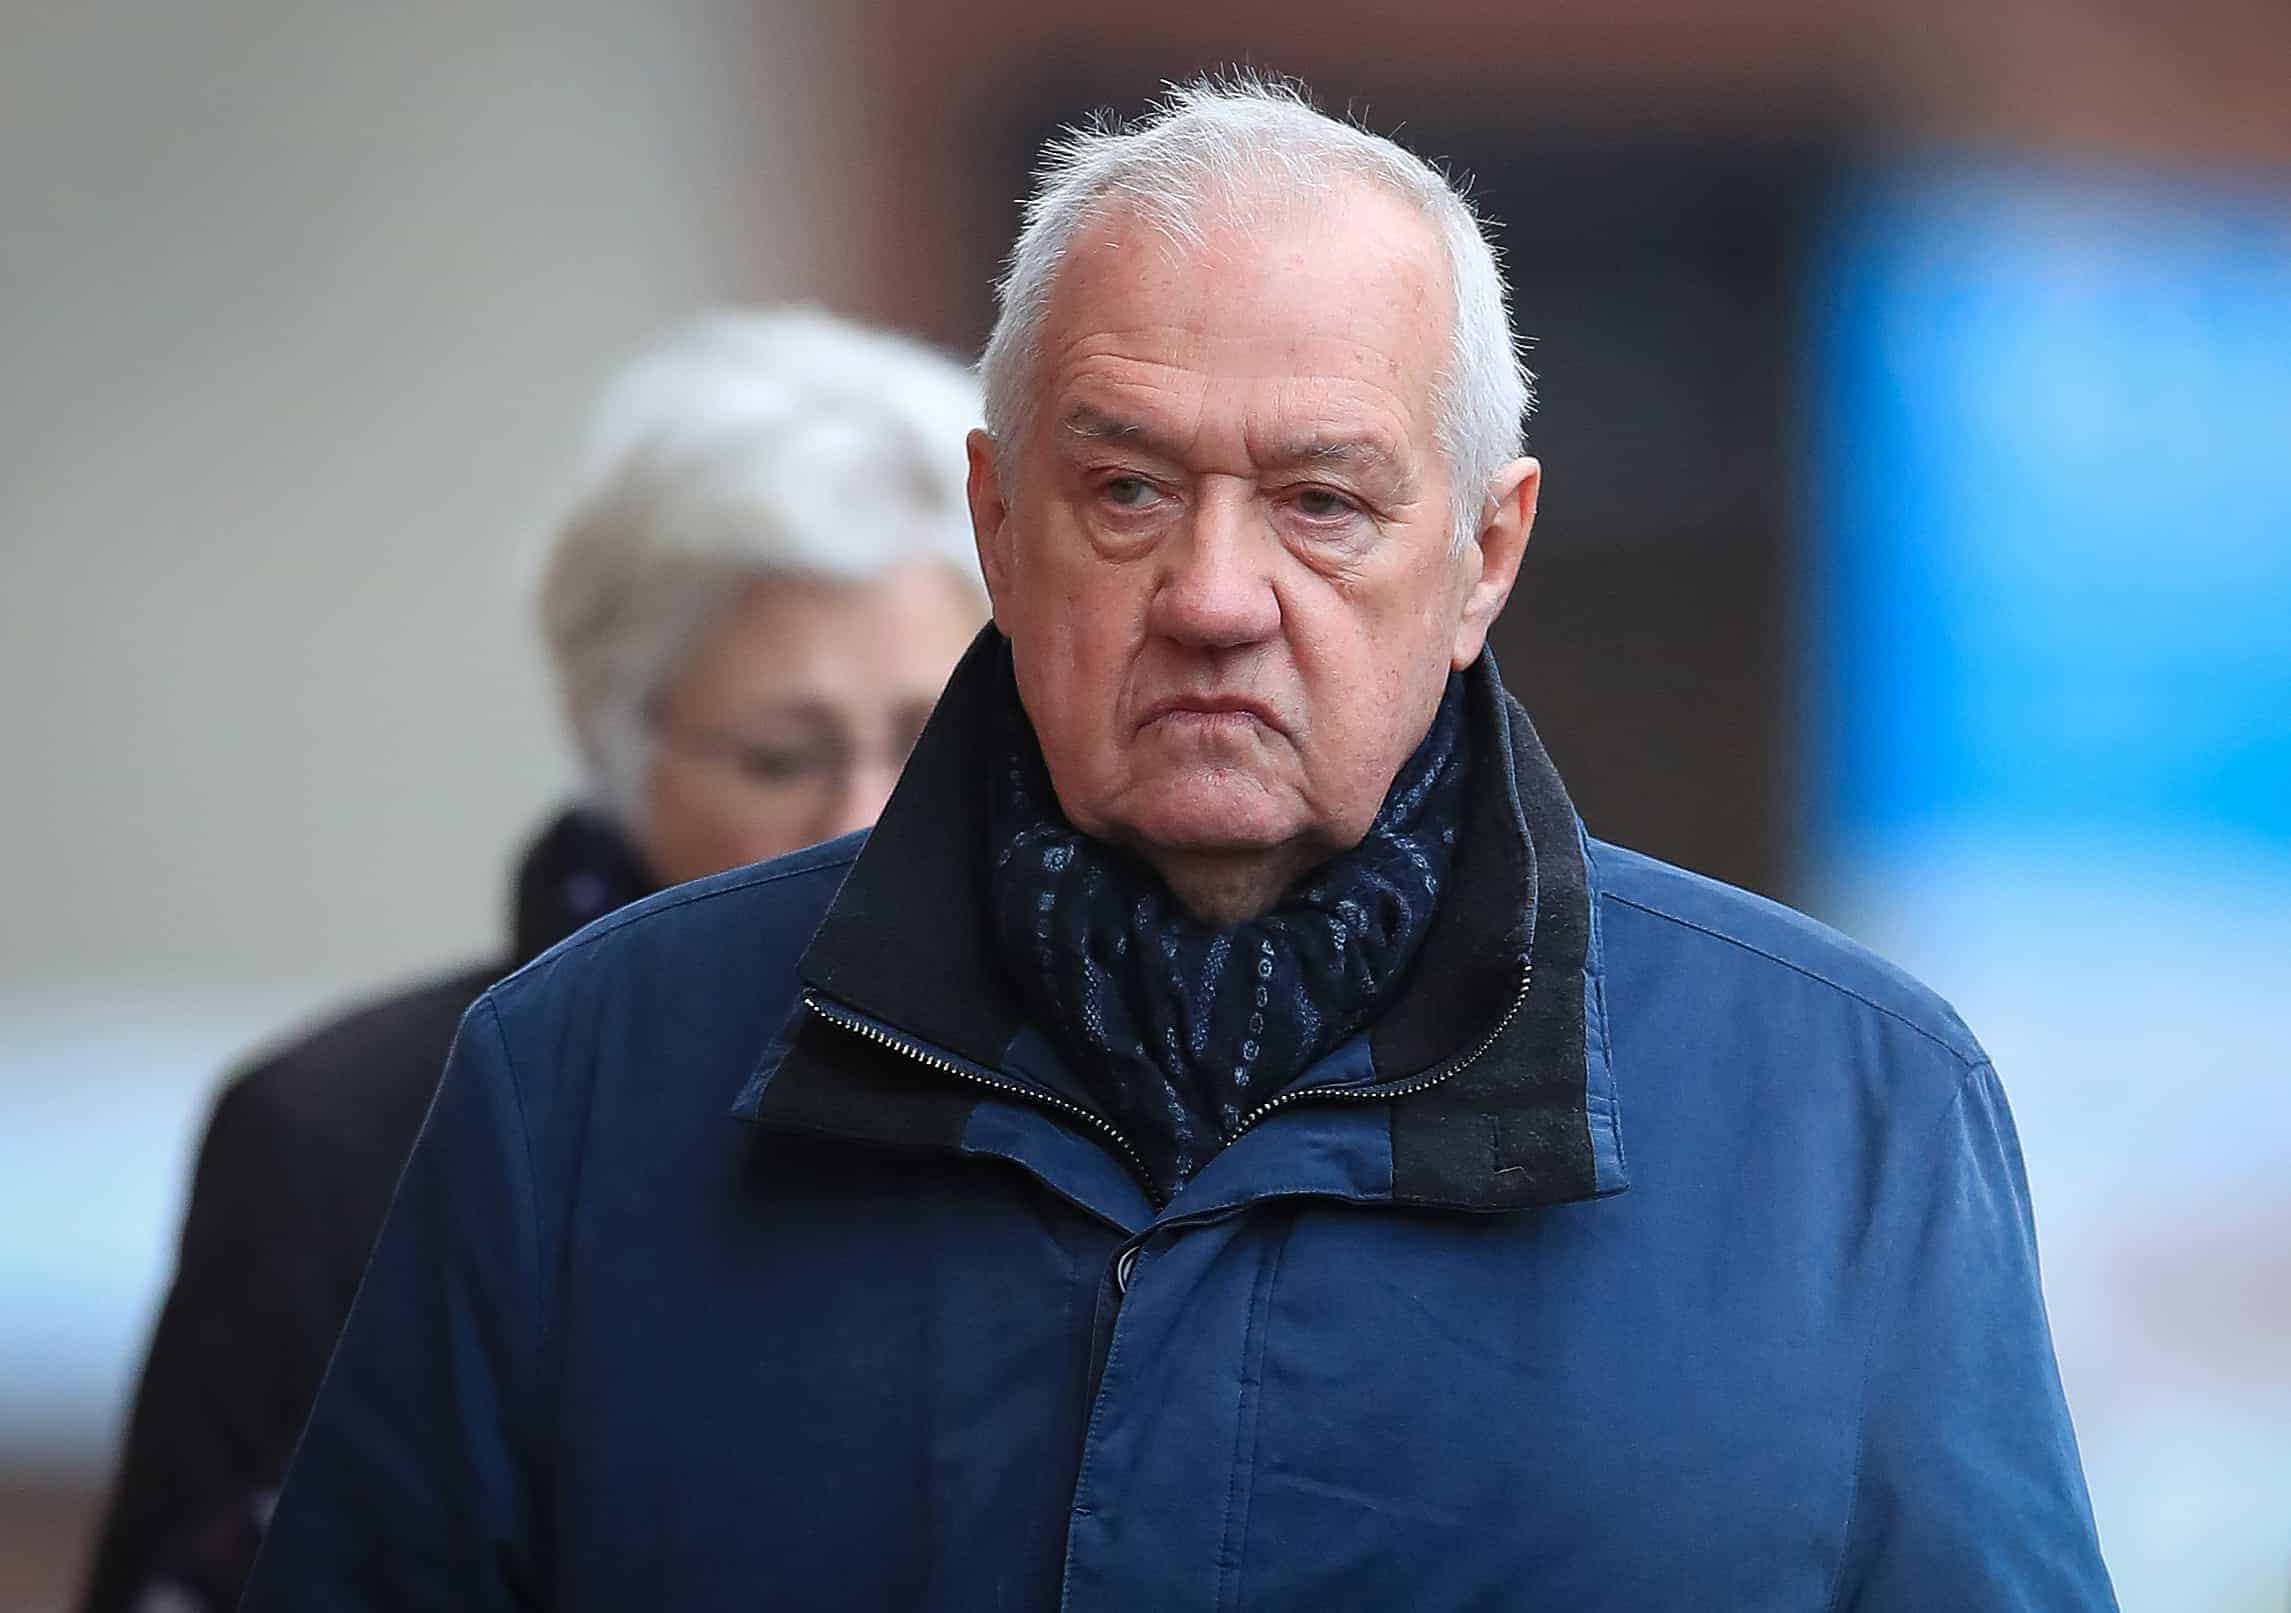 David Duckenfield found not guilty of the gross negligence manslaughter of 95 Liverpool fans at Hillsborough